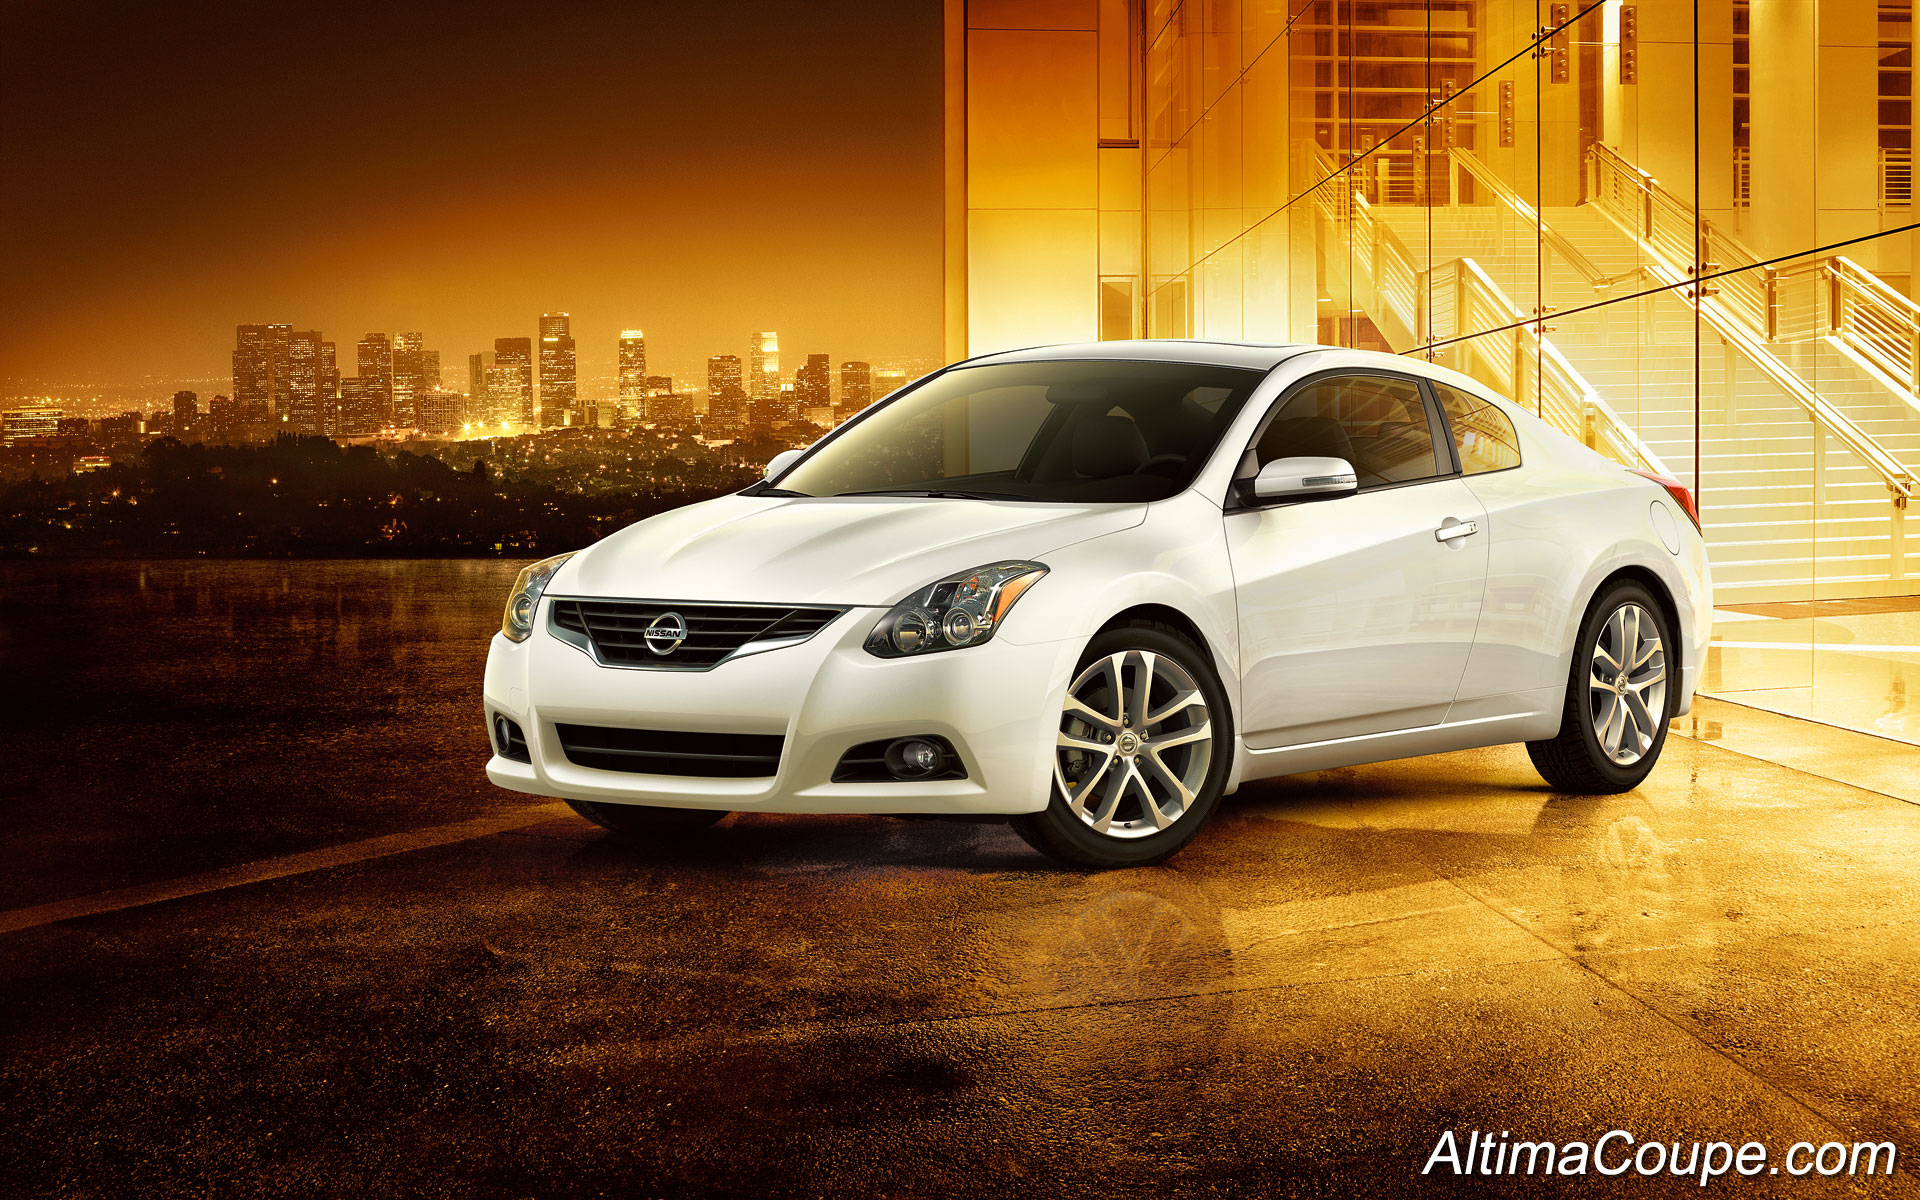 Best Nissan Altima Coupe Wallpaper